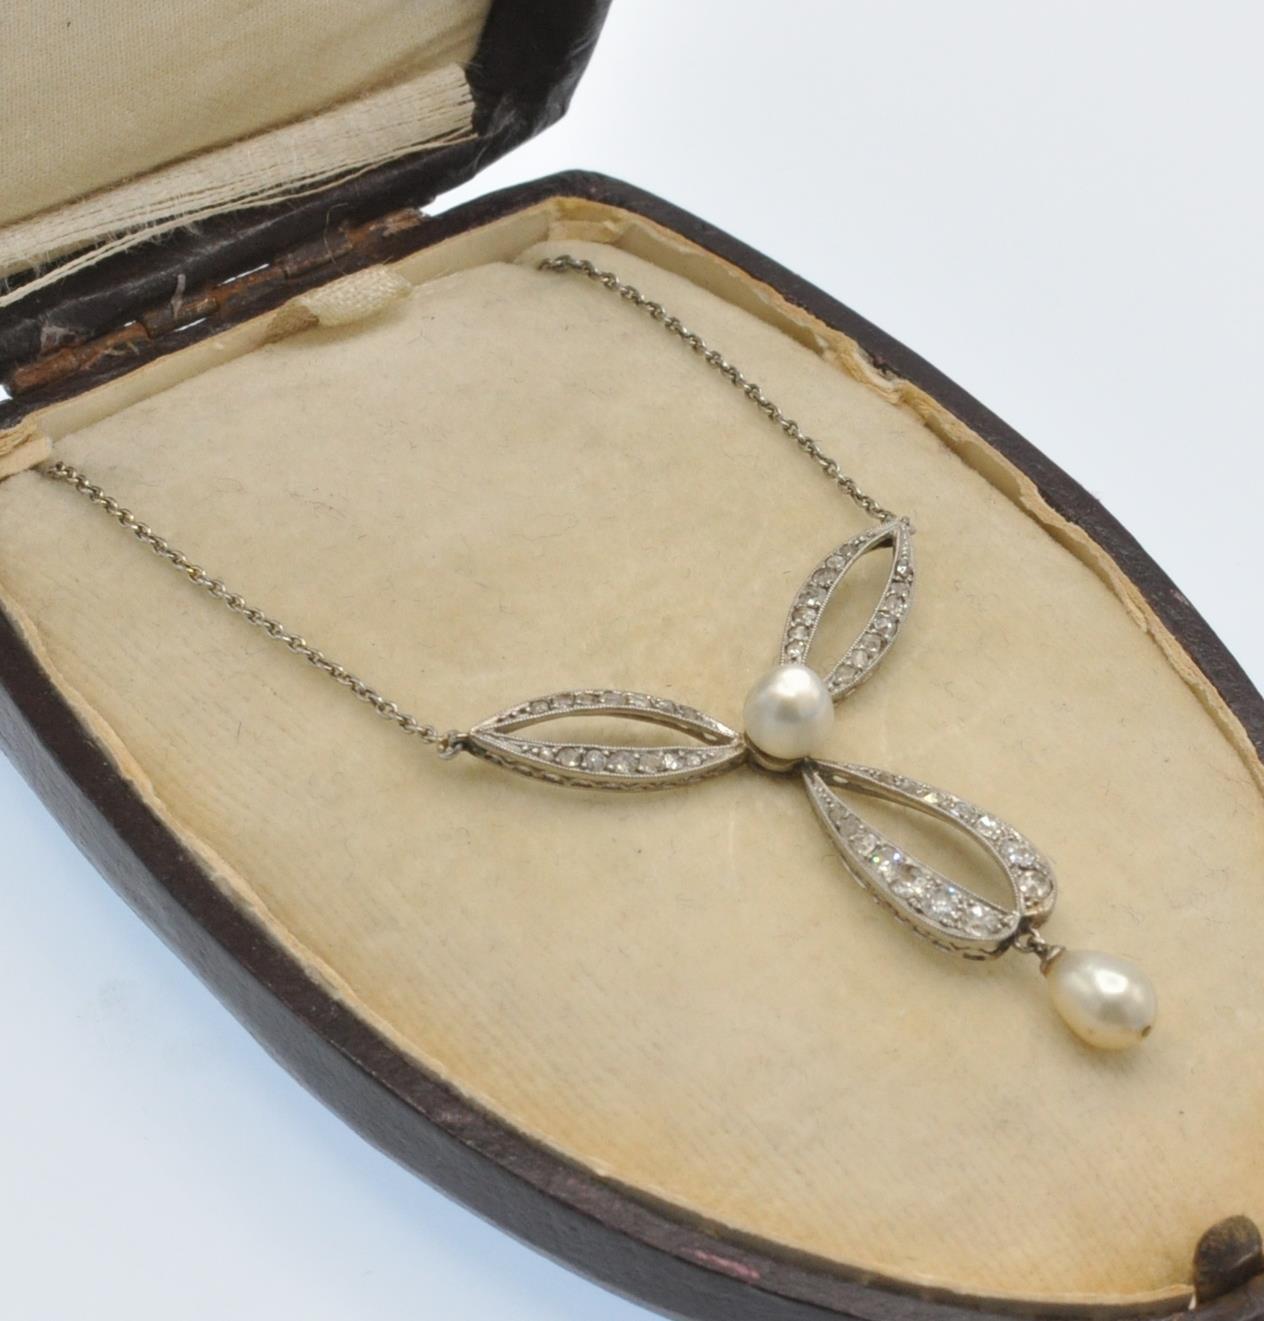 An Antique Cased 18ct White Gold Pearl & Diamond Pendant Necklace - Image 5 of 5